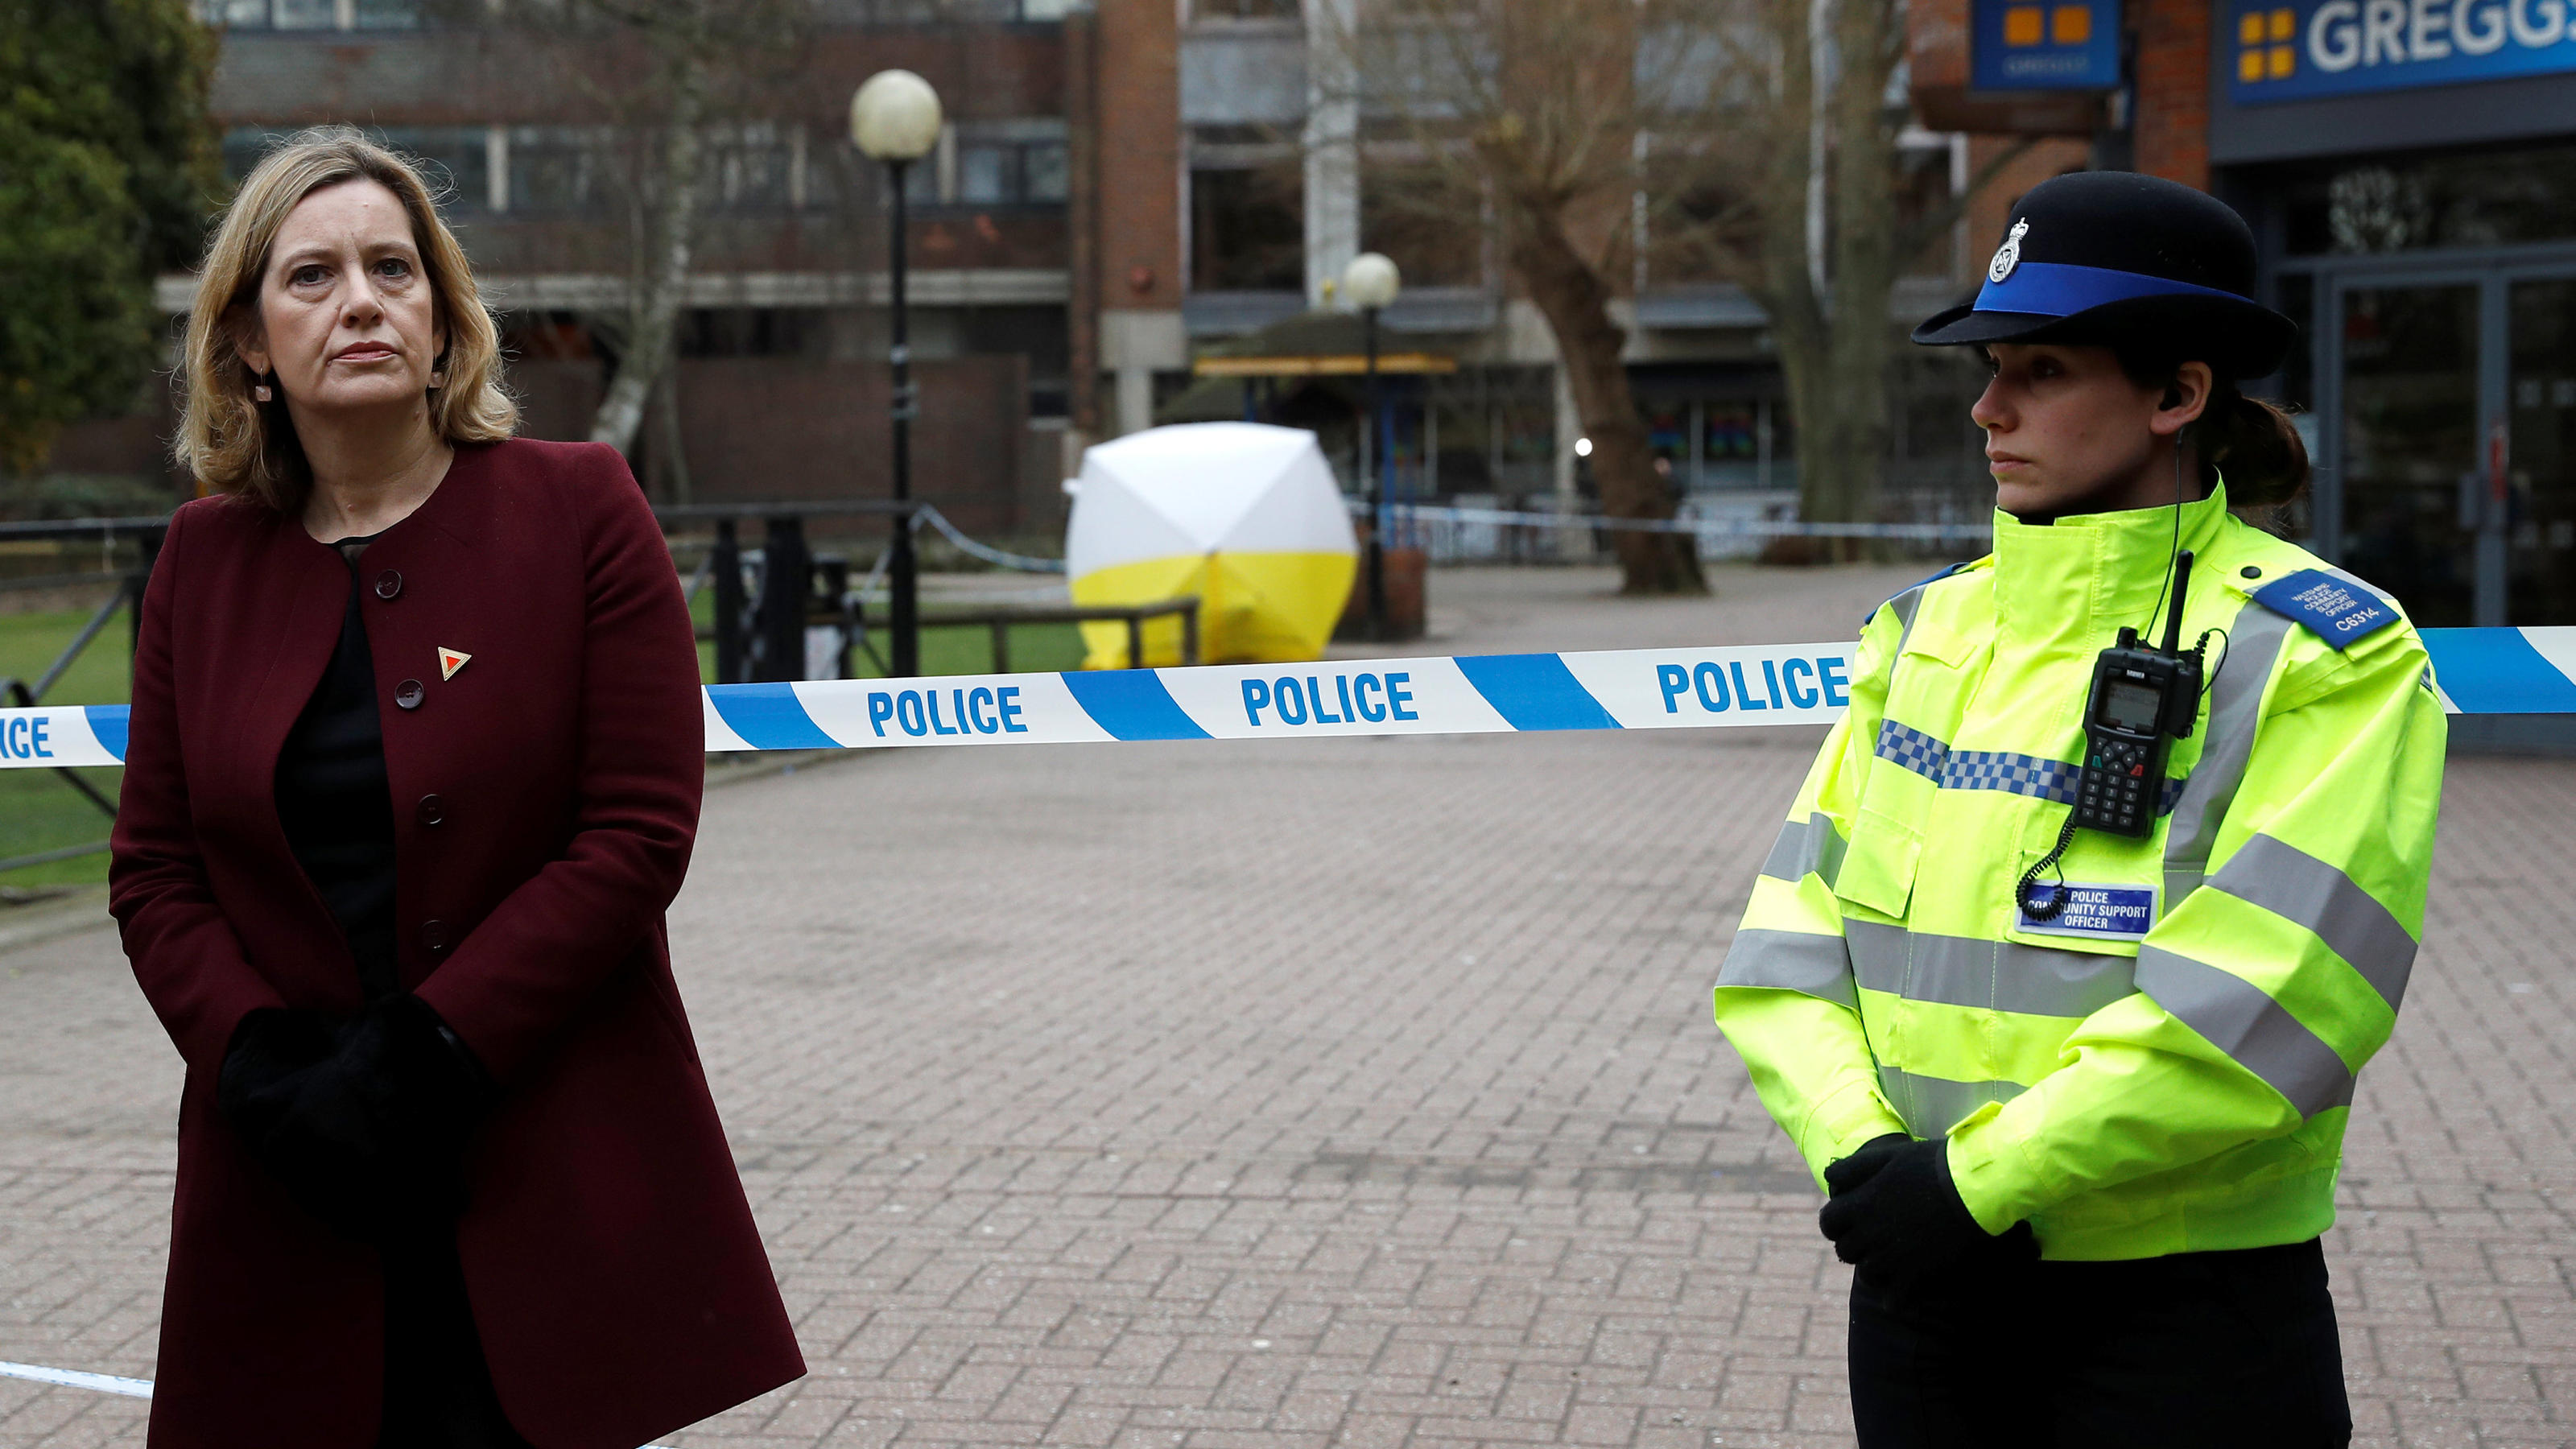 Britain's Home Secretary Amber Rudd visits the scene where Sergei Skripal and his daughter Yulia were found after having been poisoned by a nerve agent in Salisbury, Britain, March 9, 2018. REUTERS/Peter Nicholls